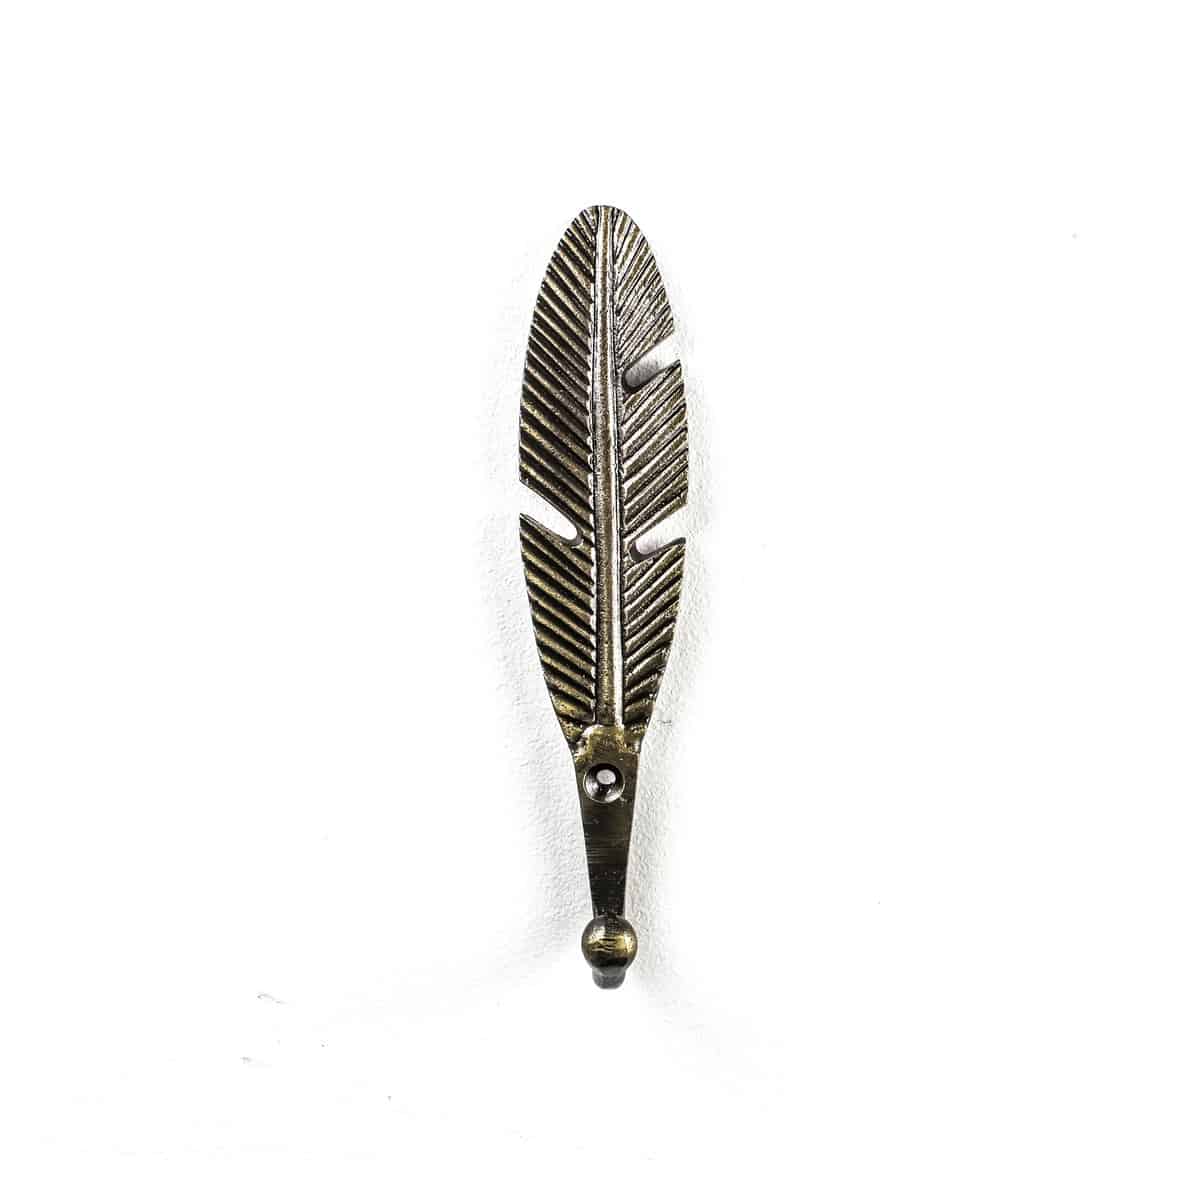 Antique Gold Feather Wall Hook - Shop for cabinet knobs and wall hooks  online